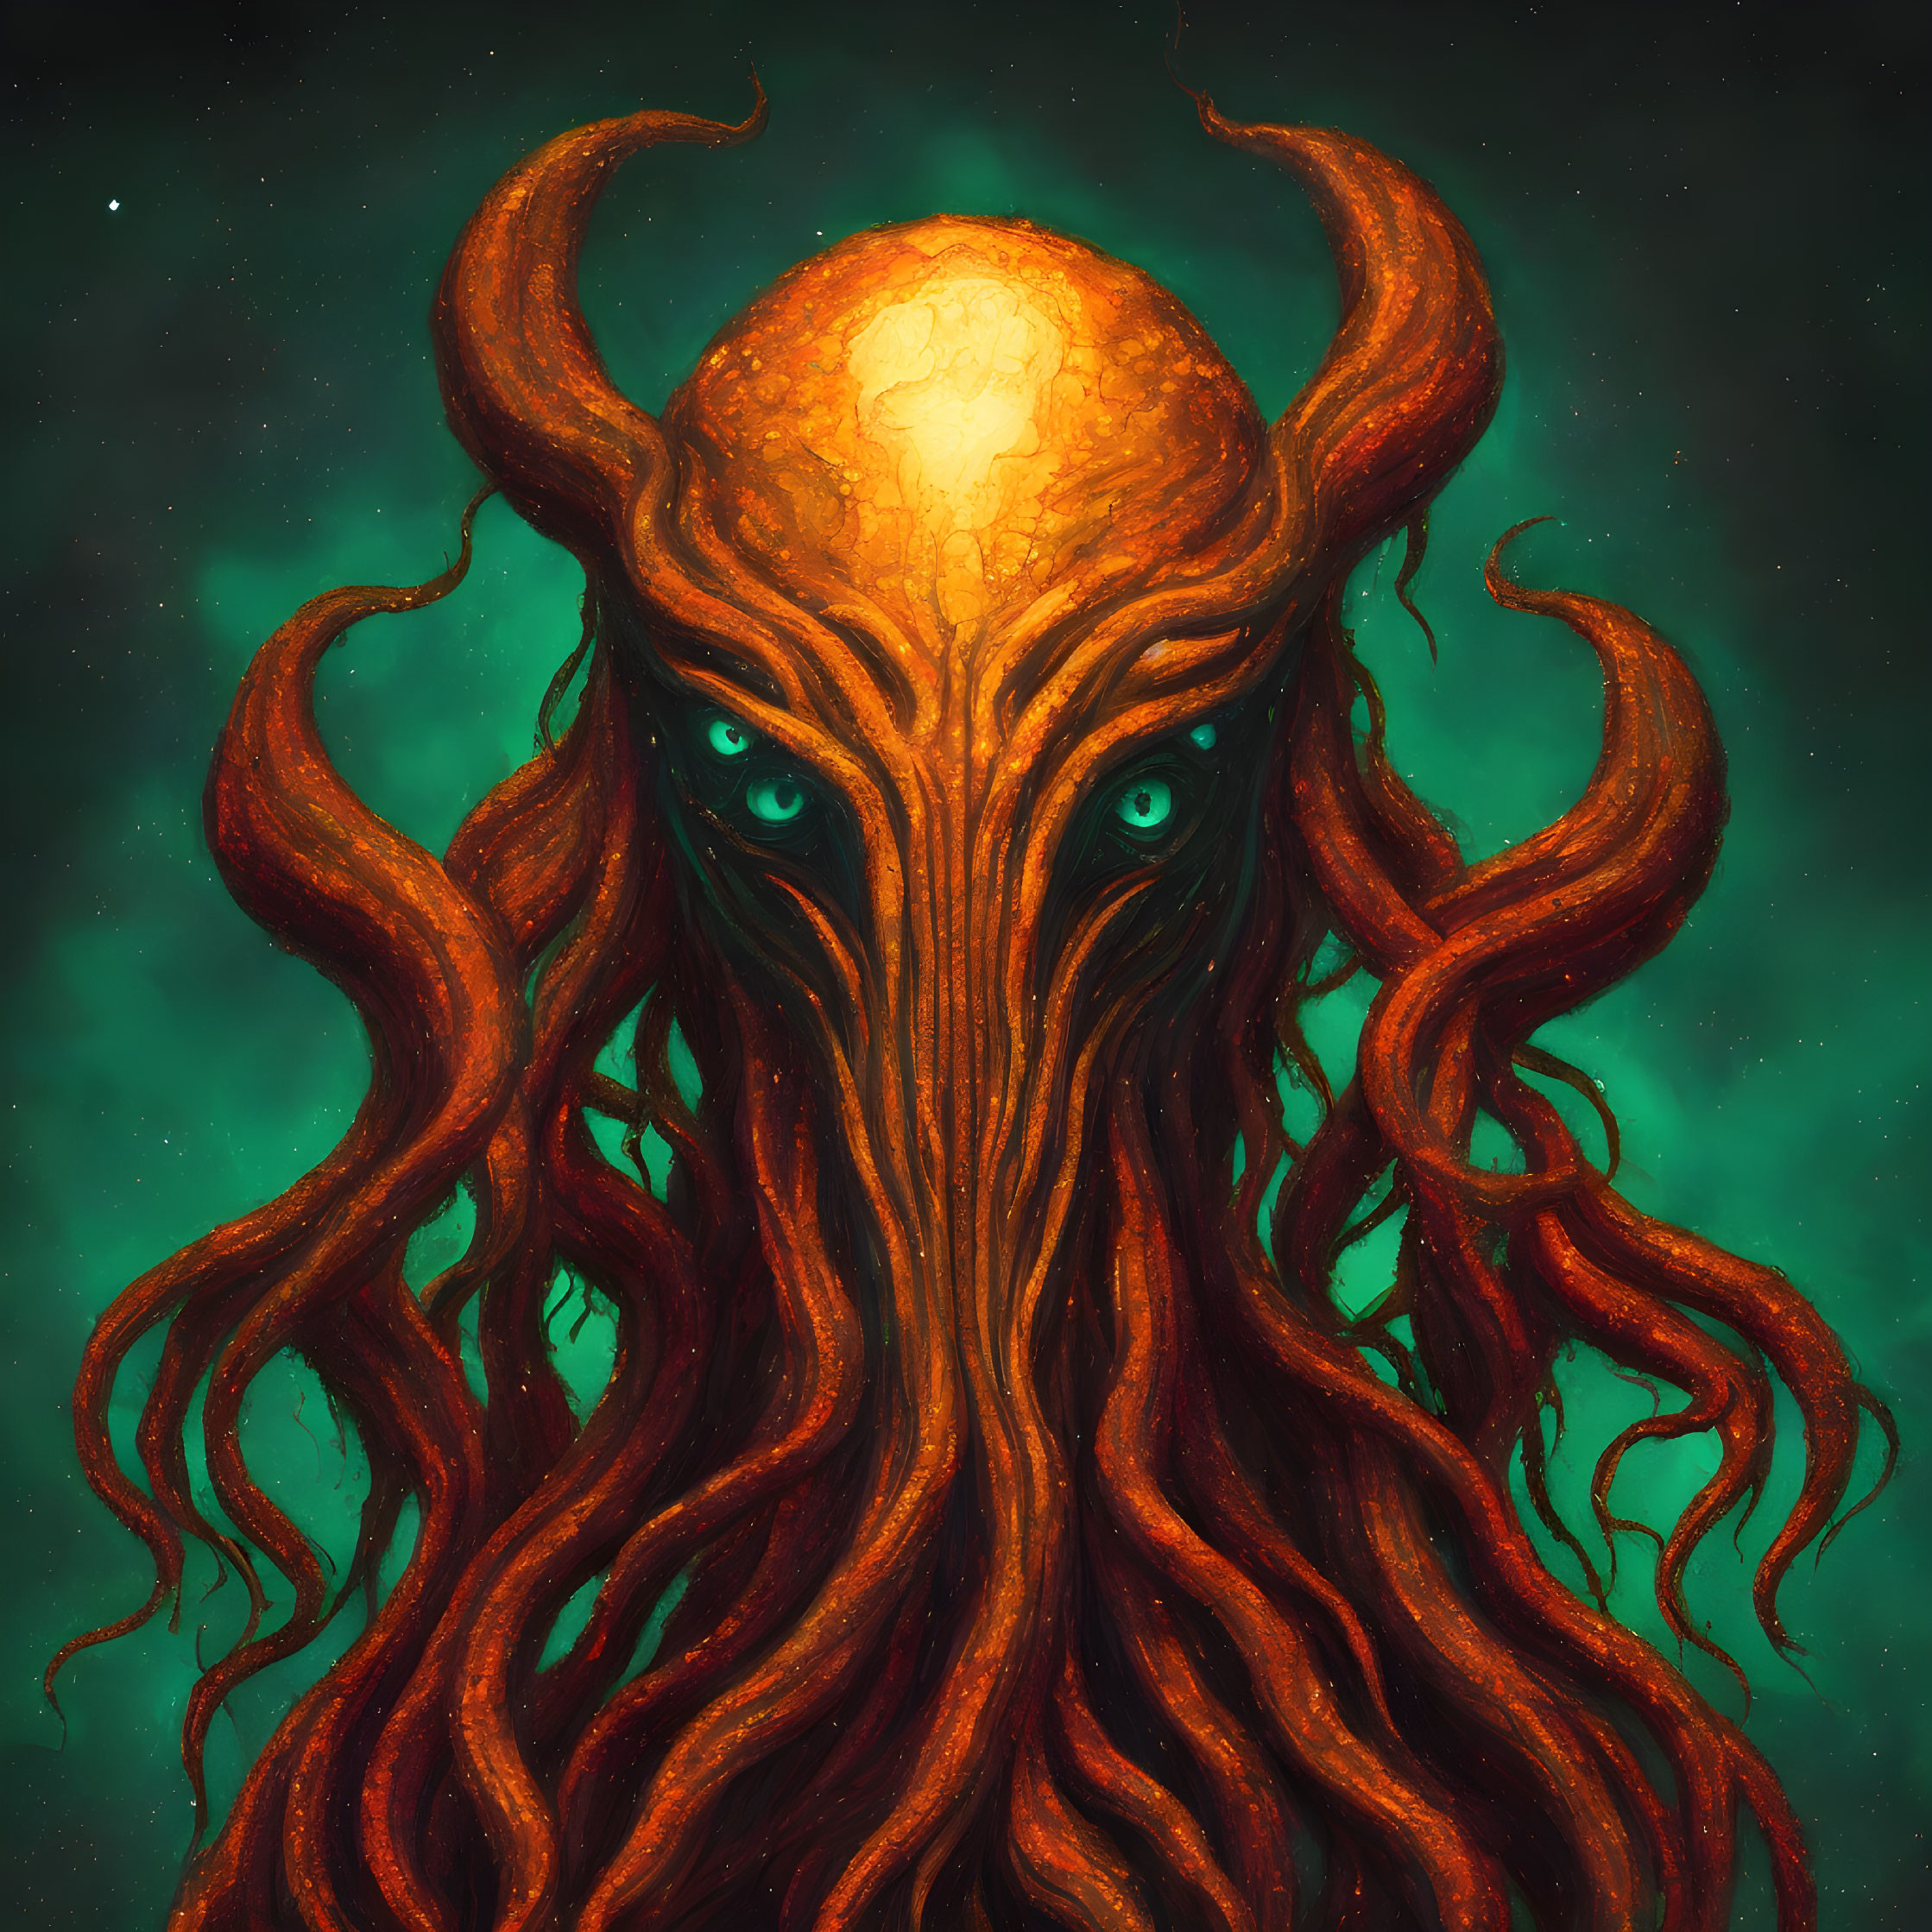 Golden cephalopod creature with emerald eyes and red tentacles on a starry green background